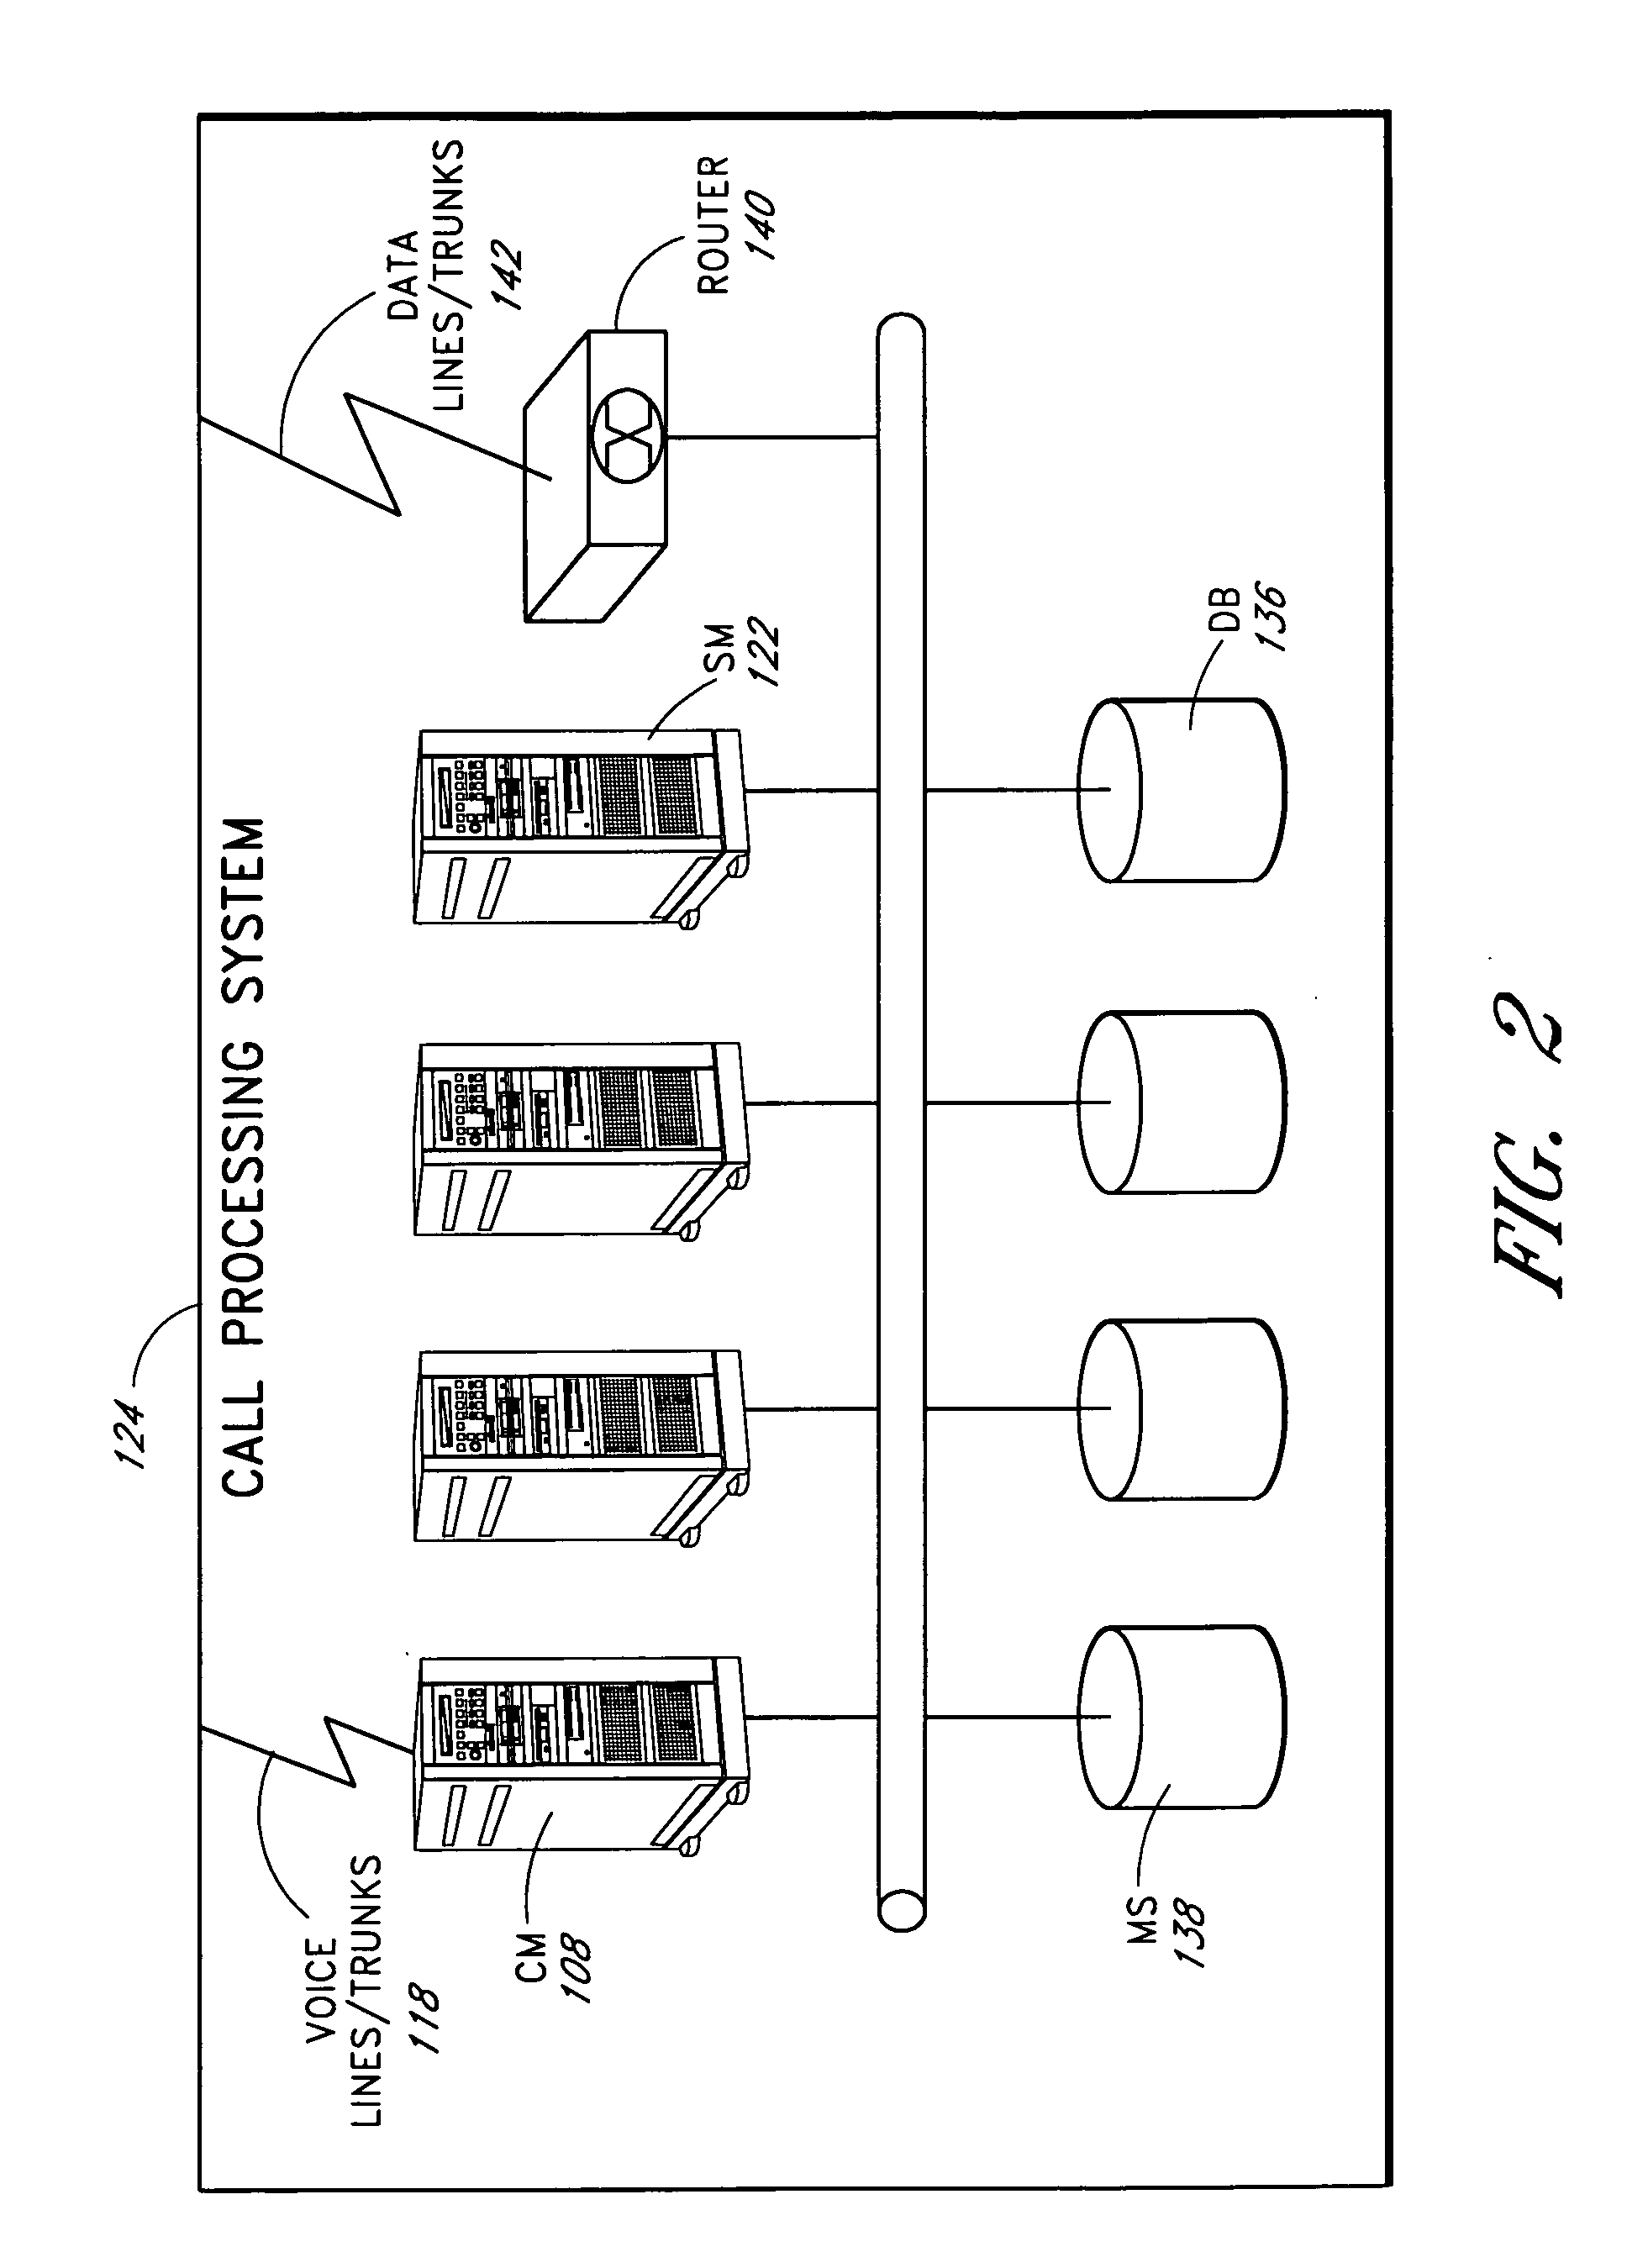 Methods and systems for telephony call-back processing